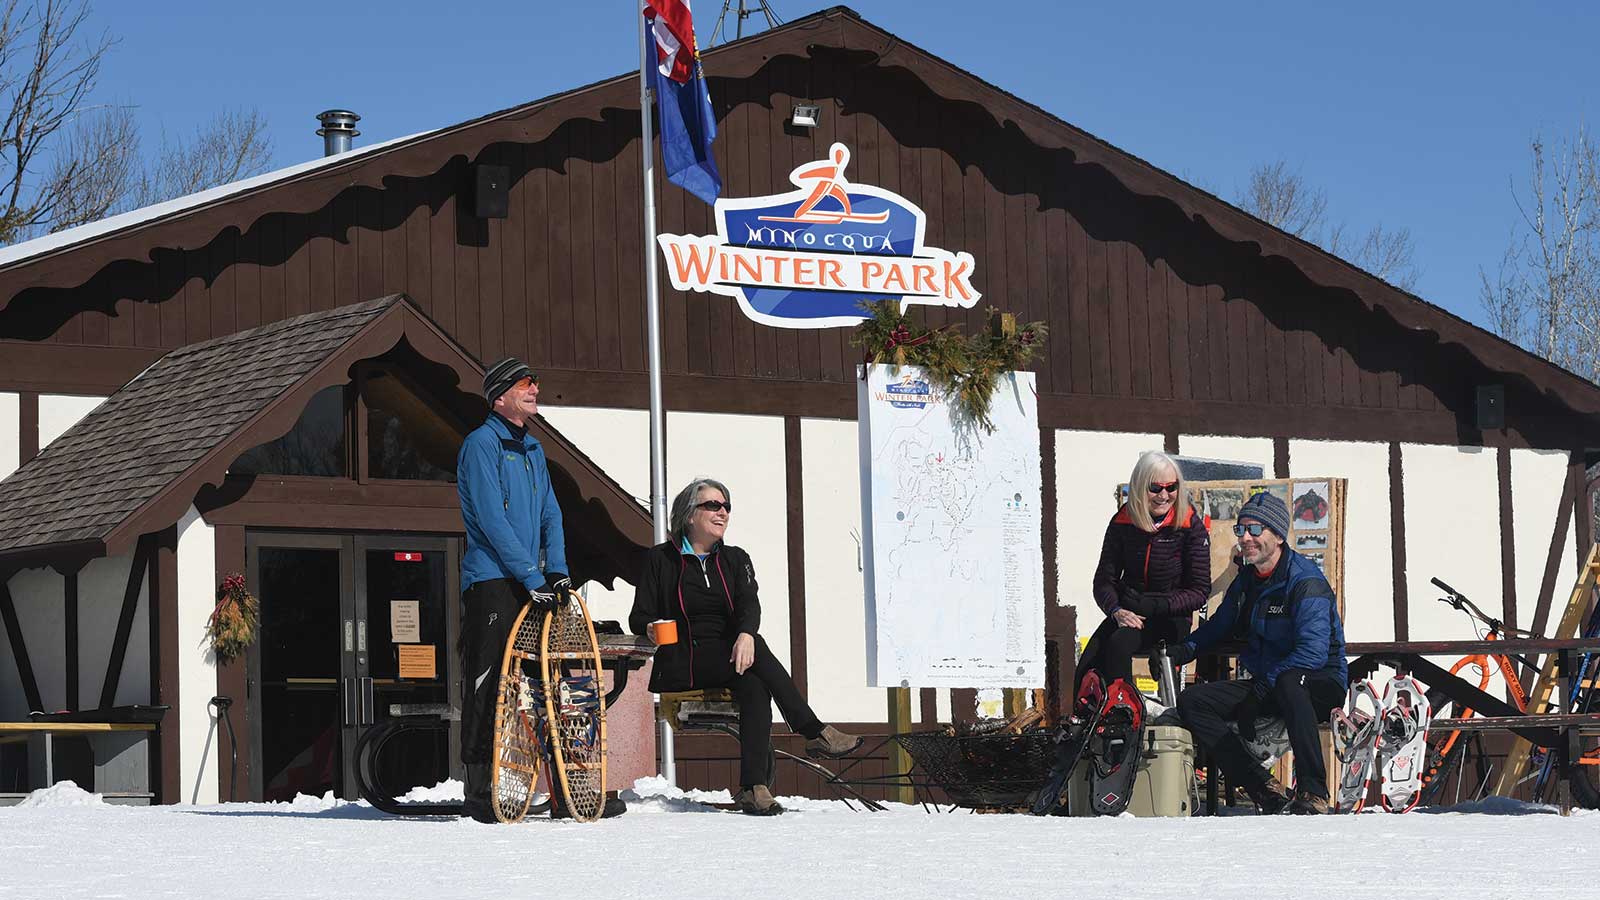 Snowshoers sitting on benches outside Minocqua Winter Park